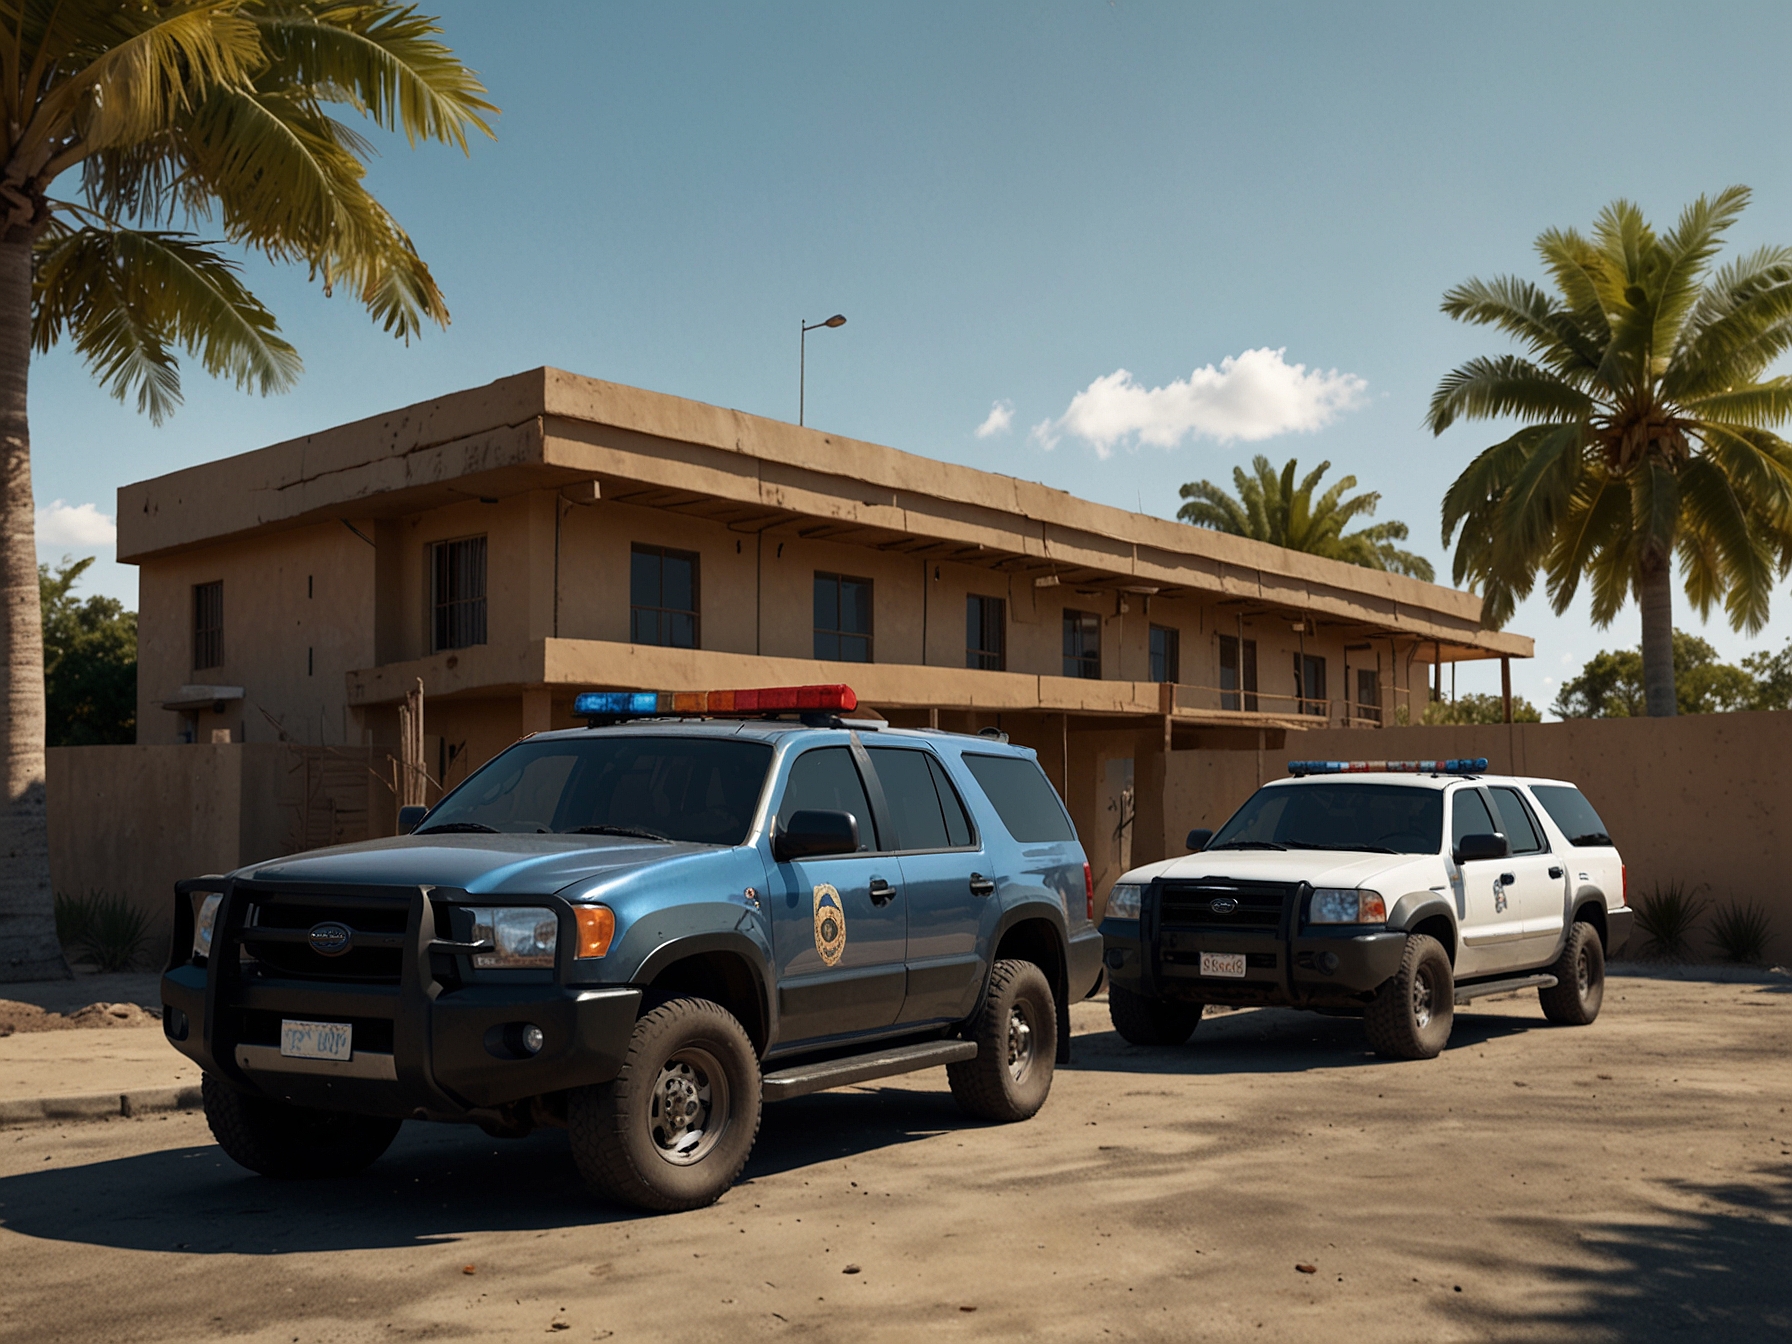 Police vehicles parked in front of an Indigenous community building, highlighting the operational aspects of the force.